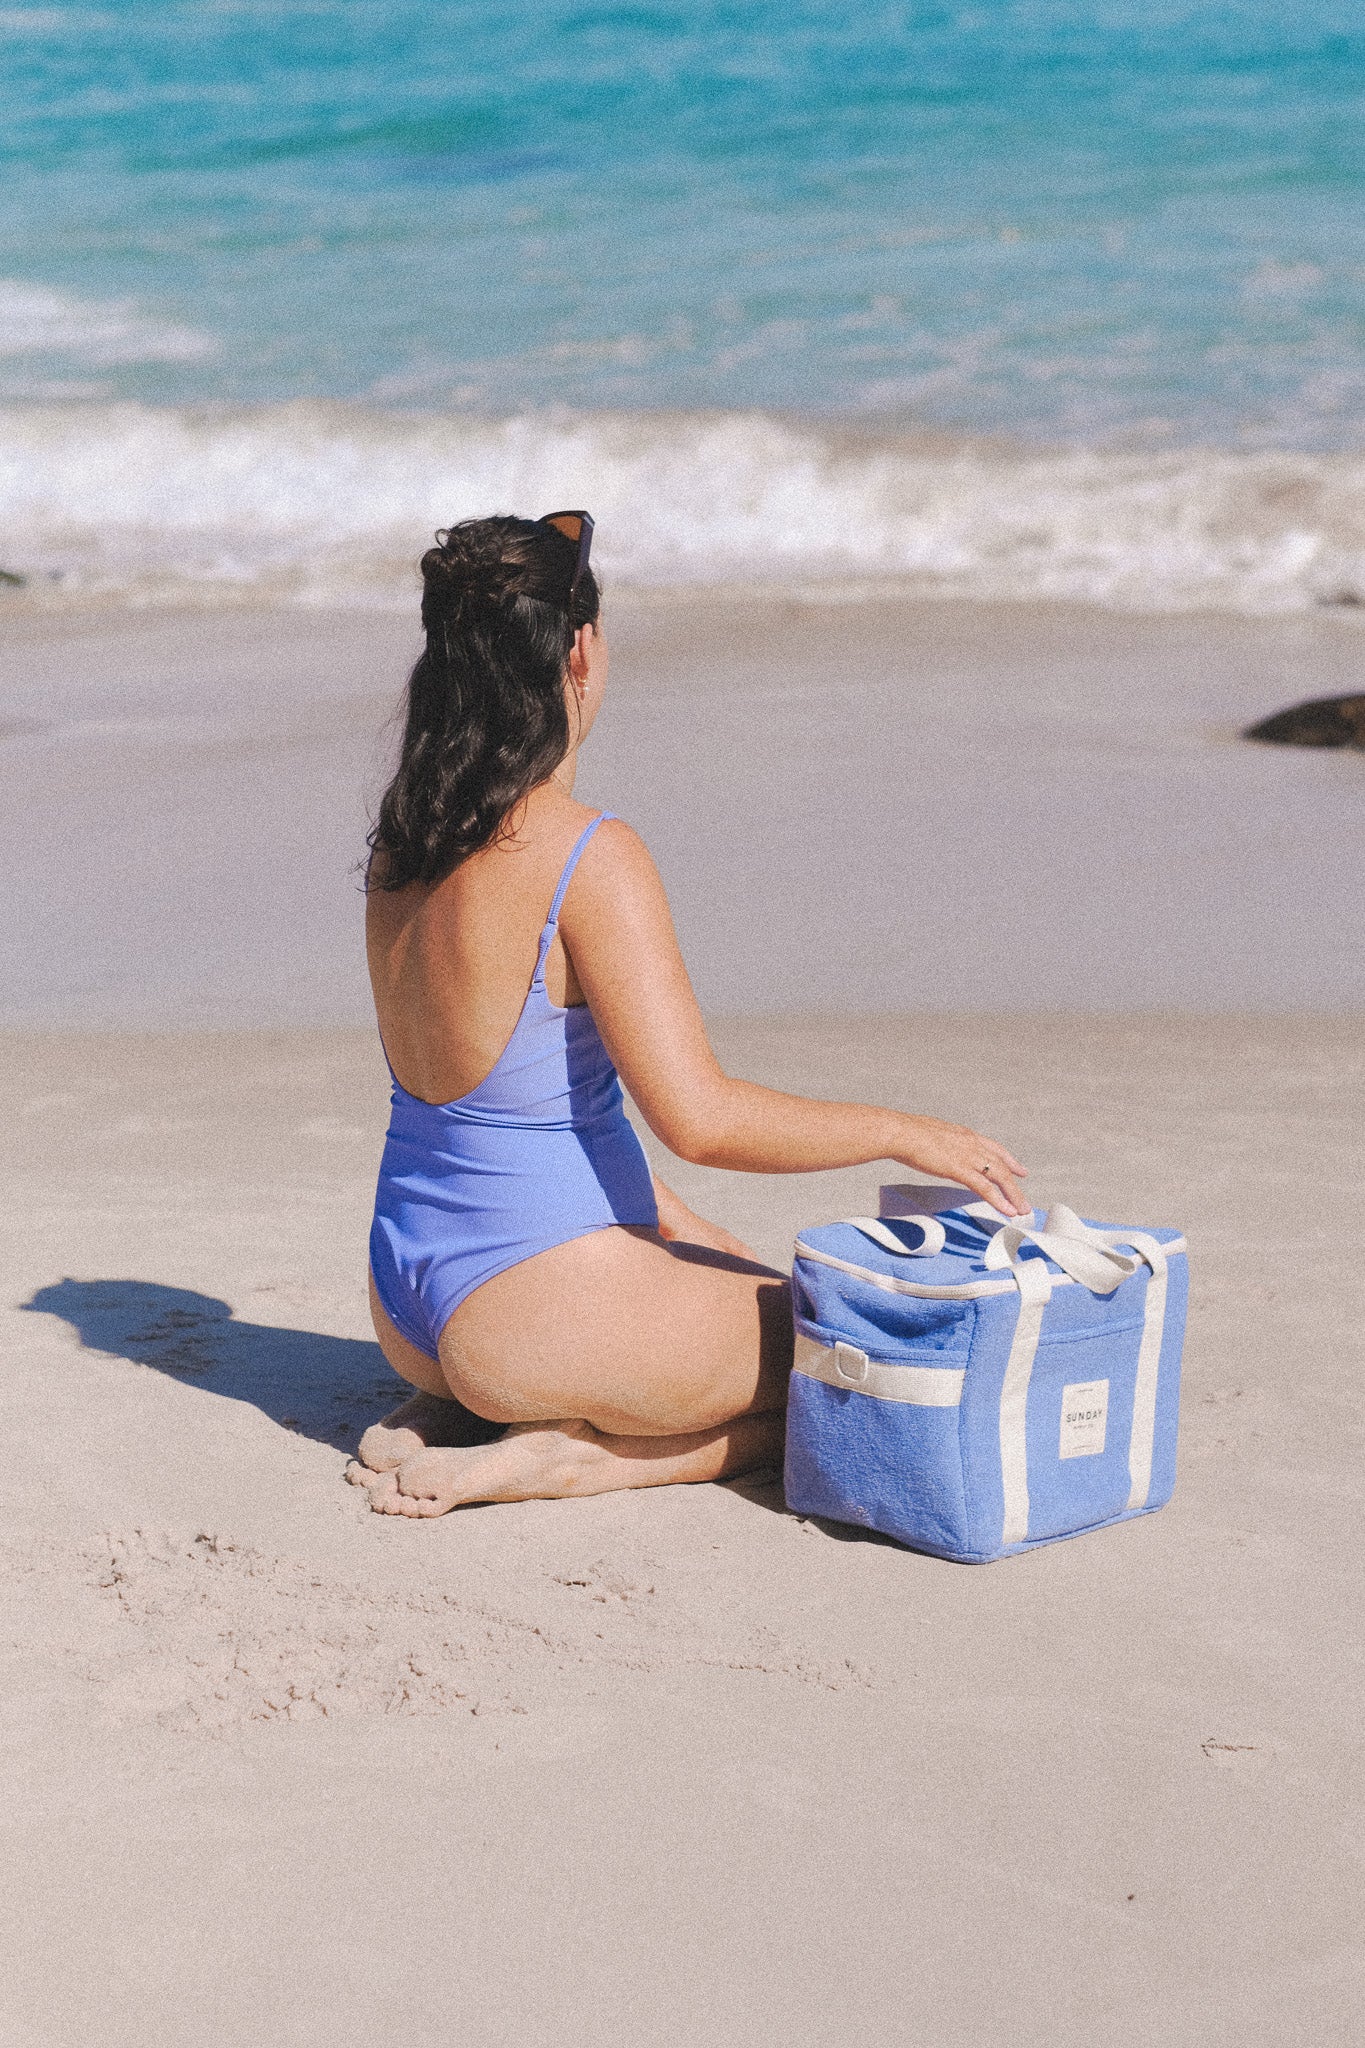 Pacific Towelling Cooler Bag